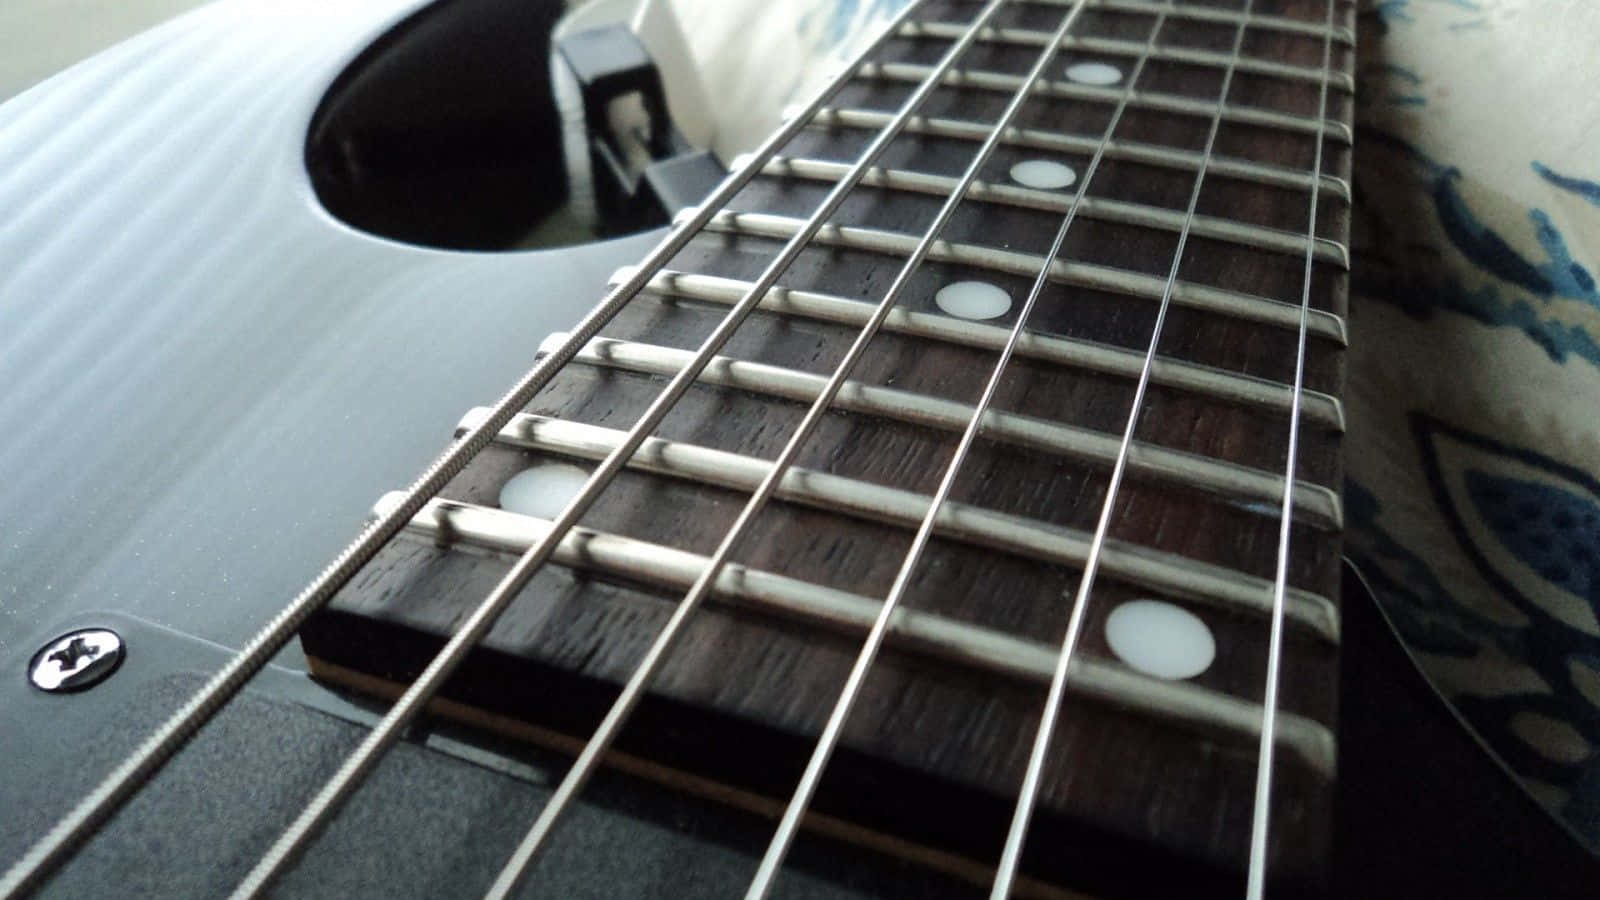 A musically inclined mind begins with a 6-string journey.